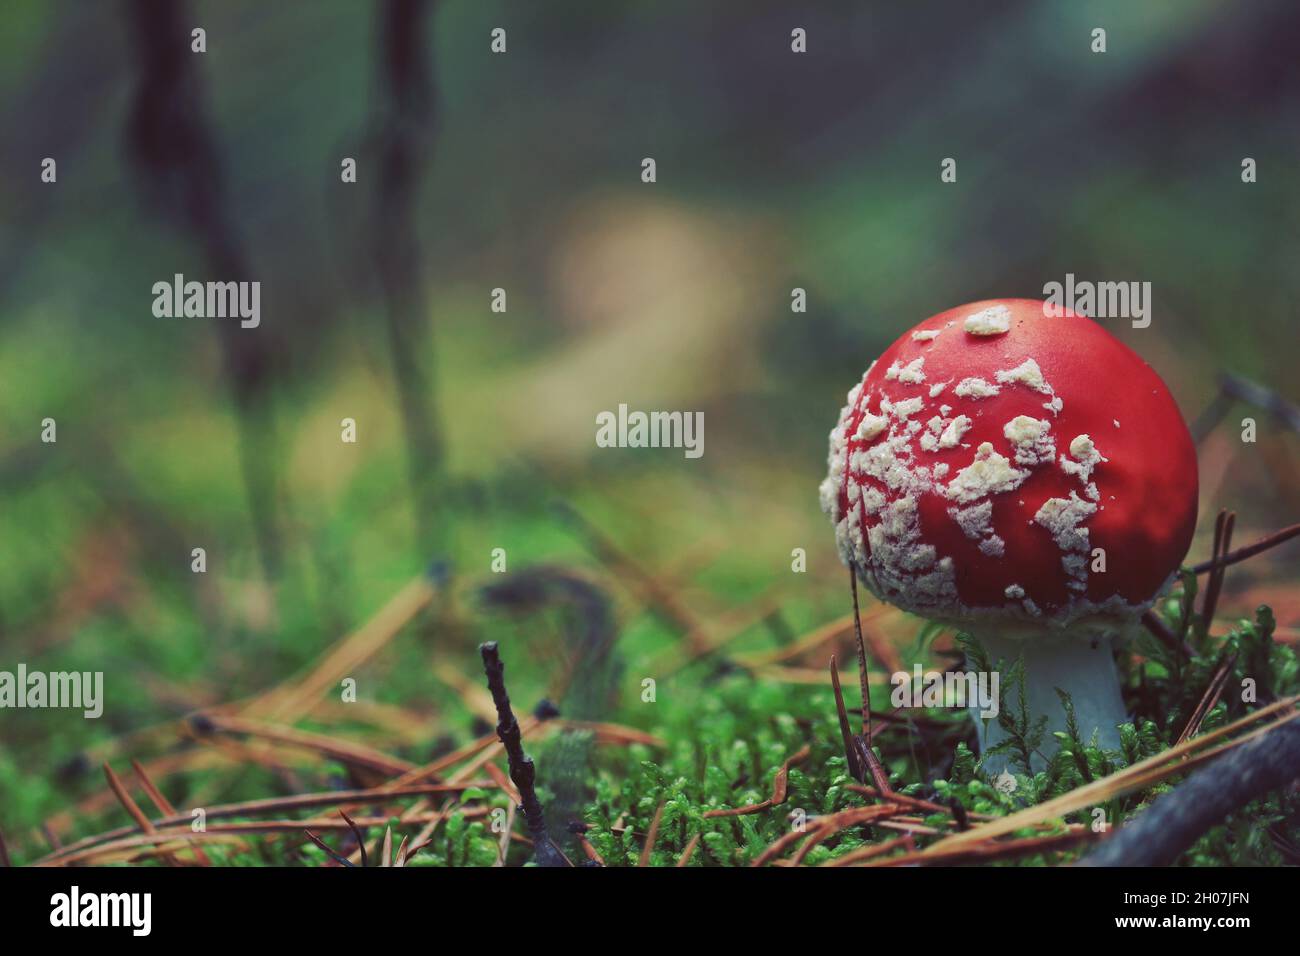 Fly Agaric, Amanita muscaria, Fly Amanita. Natural autumn background with red cap mushroom. Amanita with bright red cap with white spots in green moss. Stock Photo